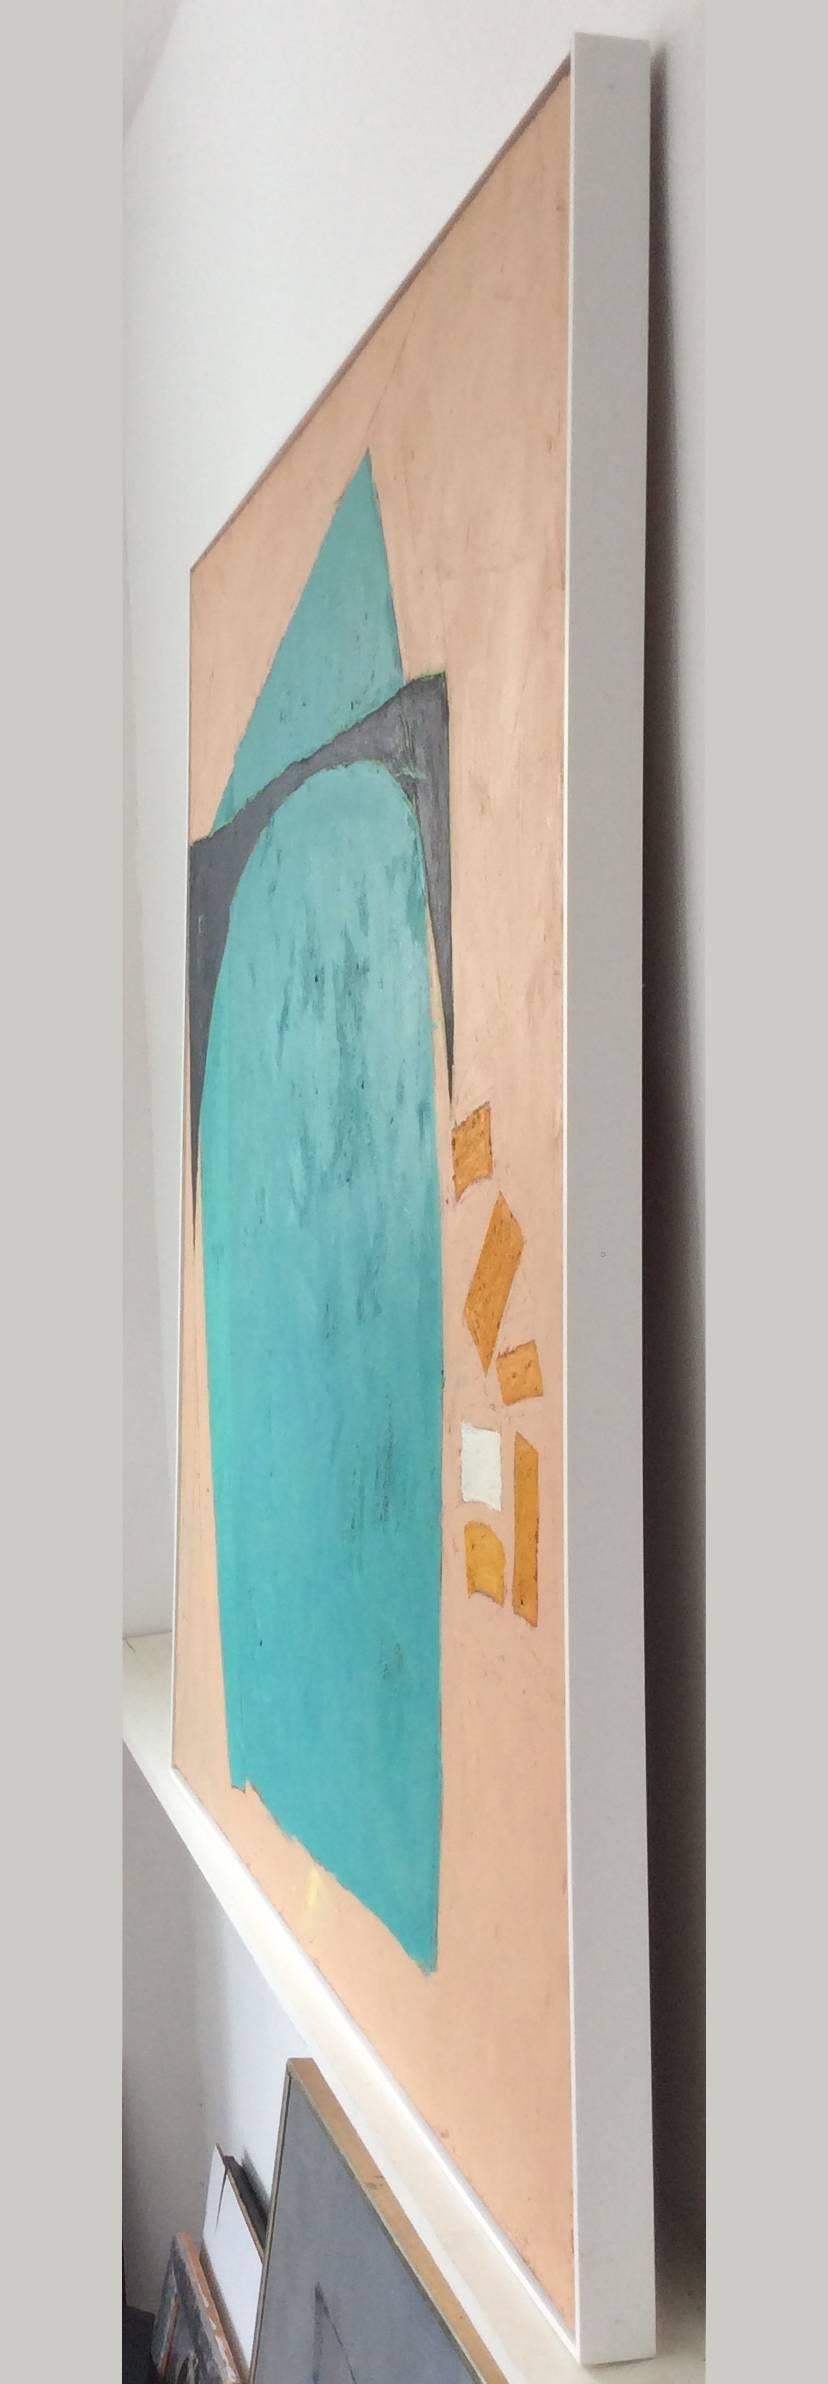 Untitled (Large Graphic Abstract Painting on Canvas in Teal and Peach) For Sale 1